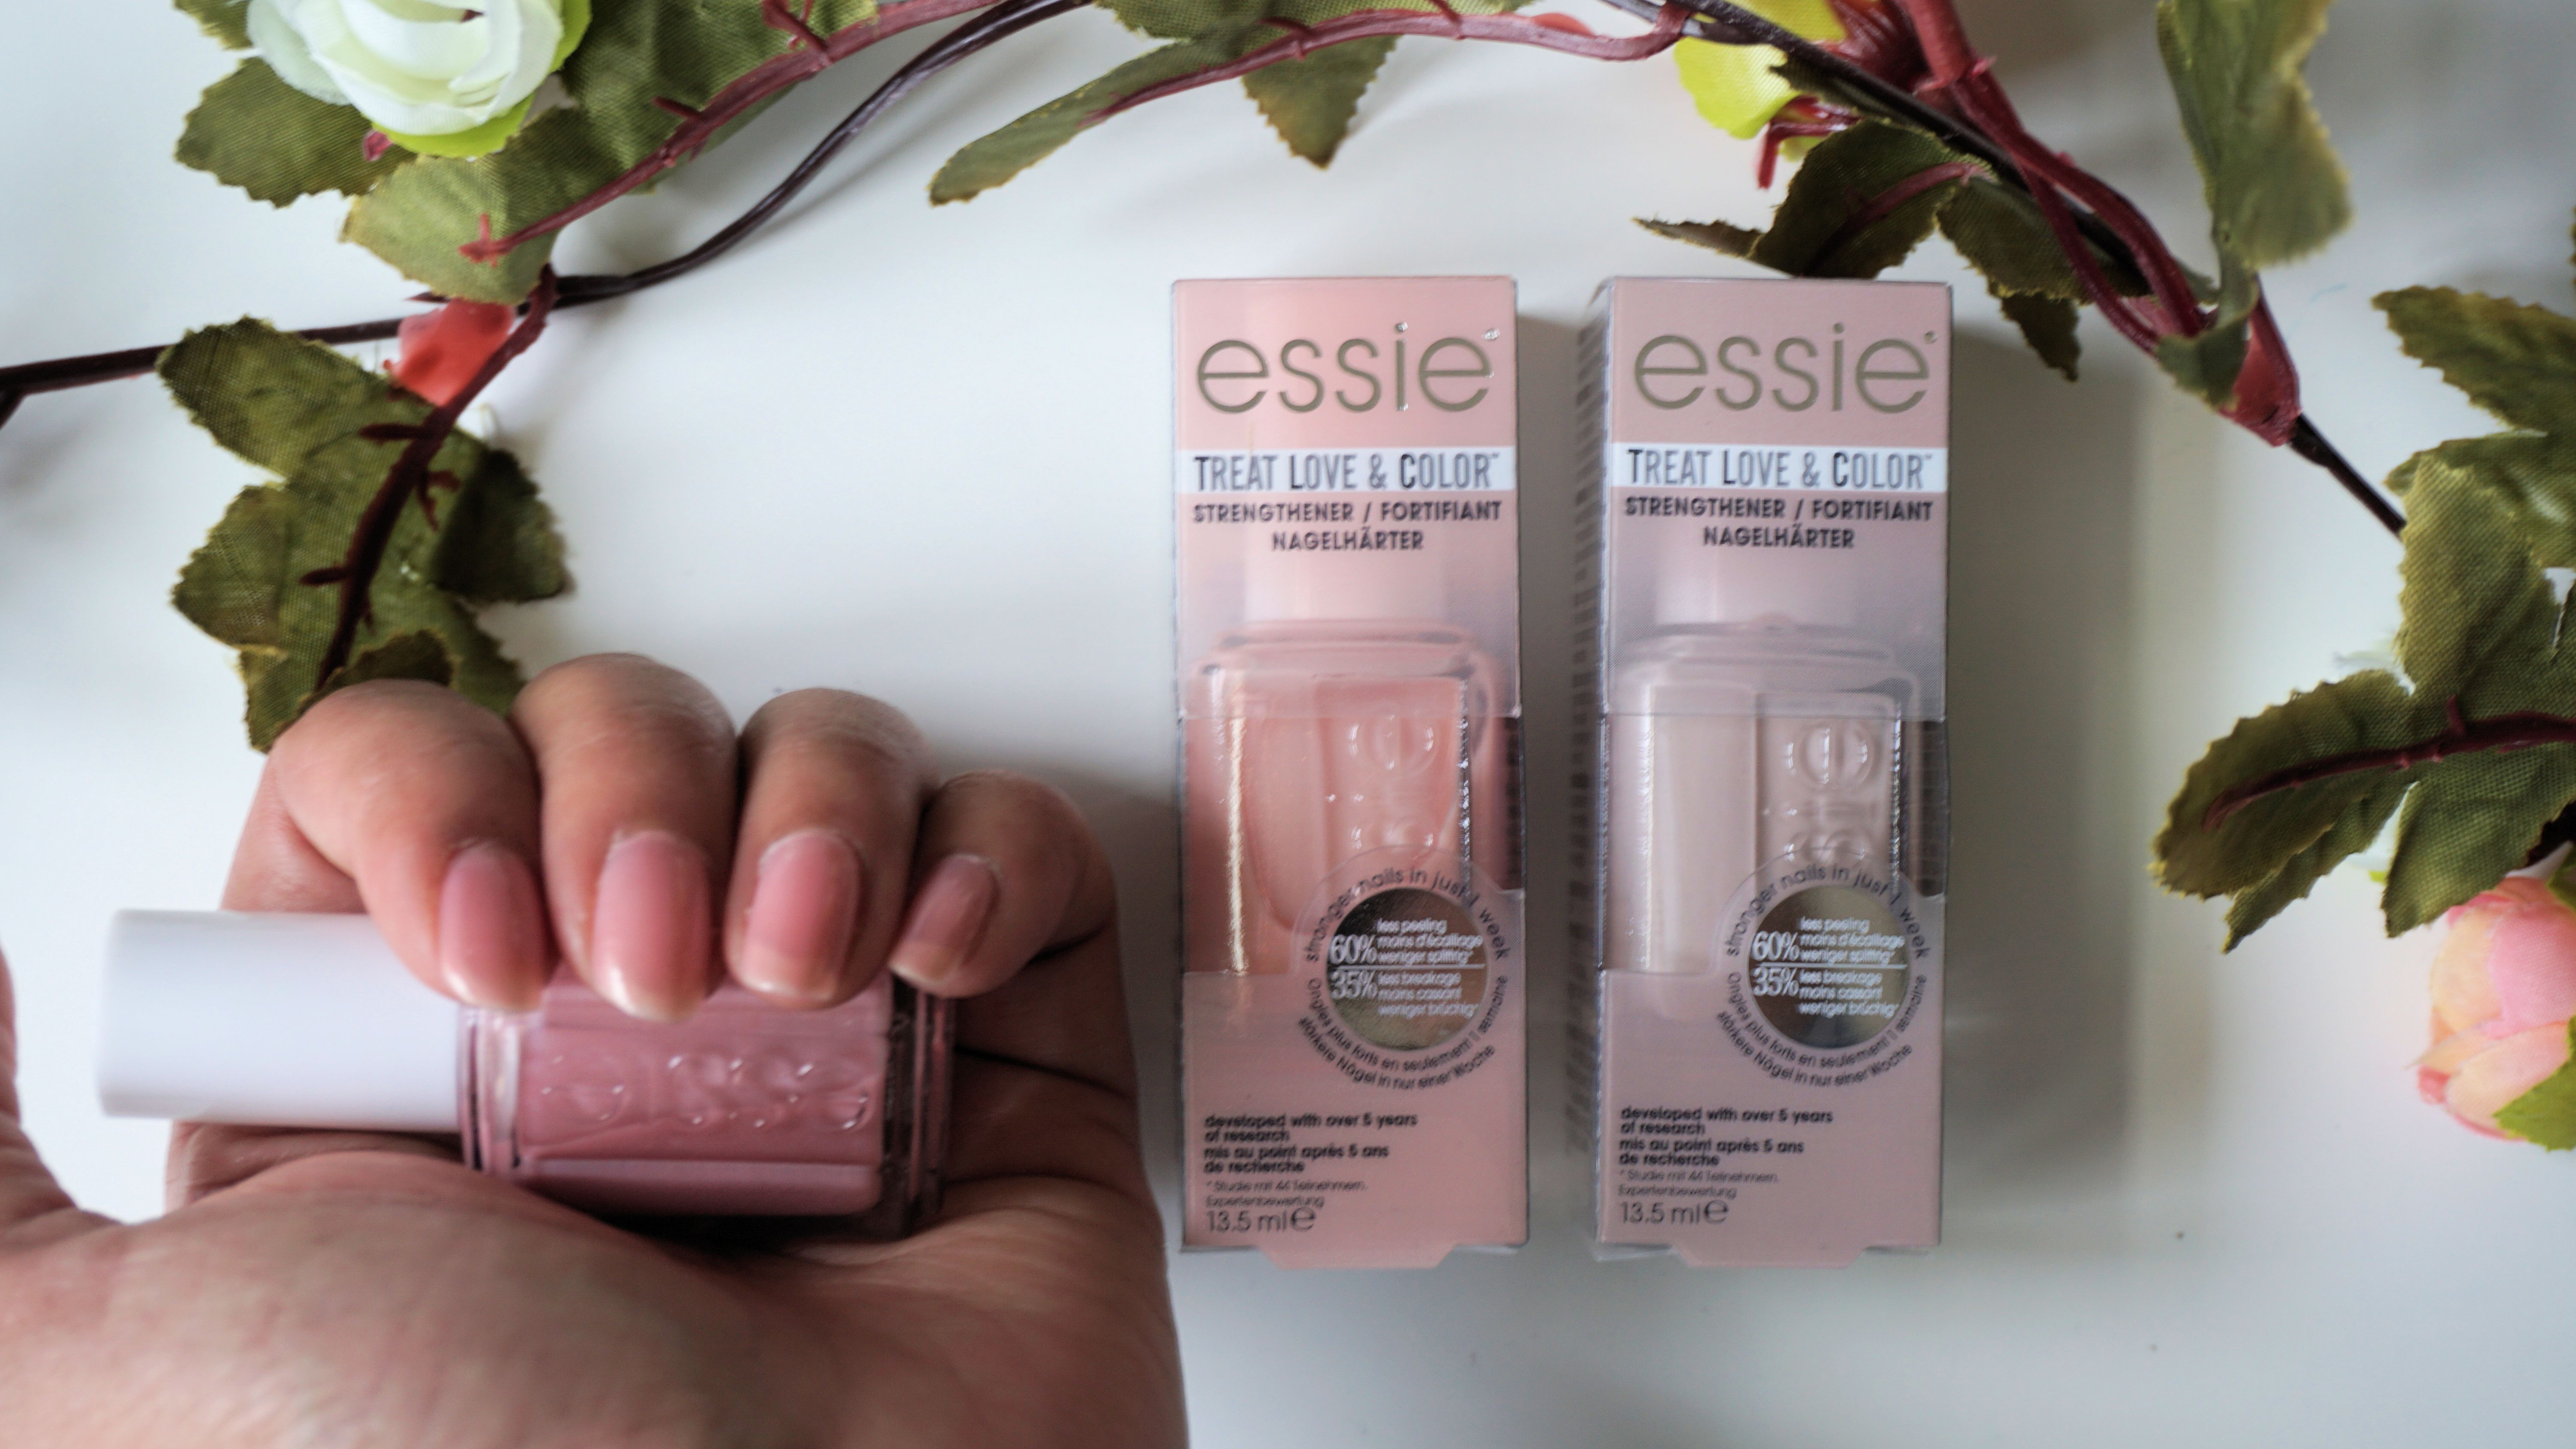 TREAT LOVE & COLOR BY essie